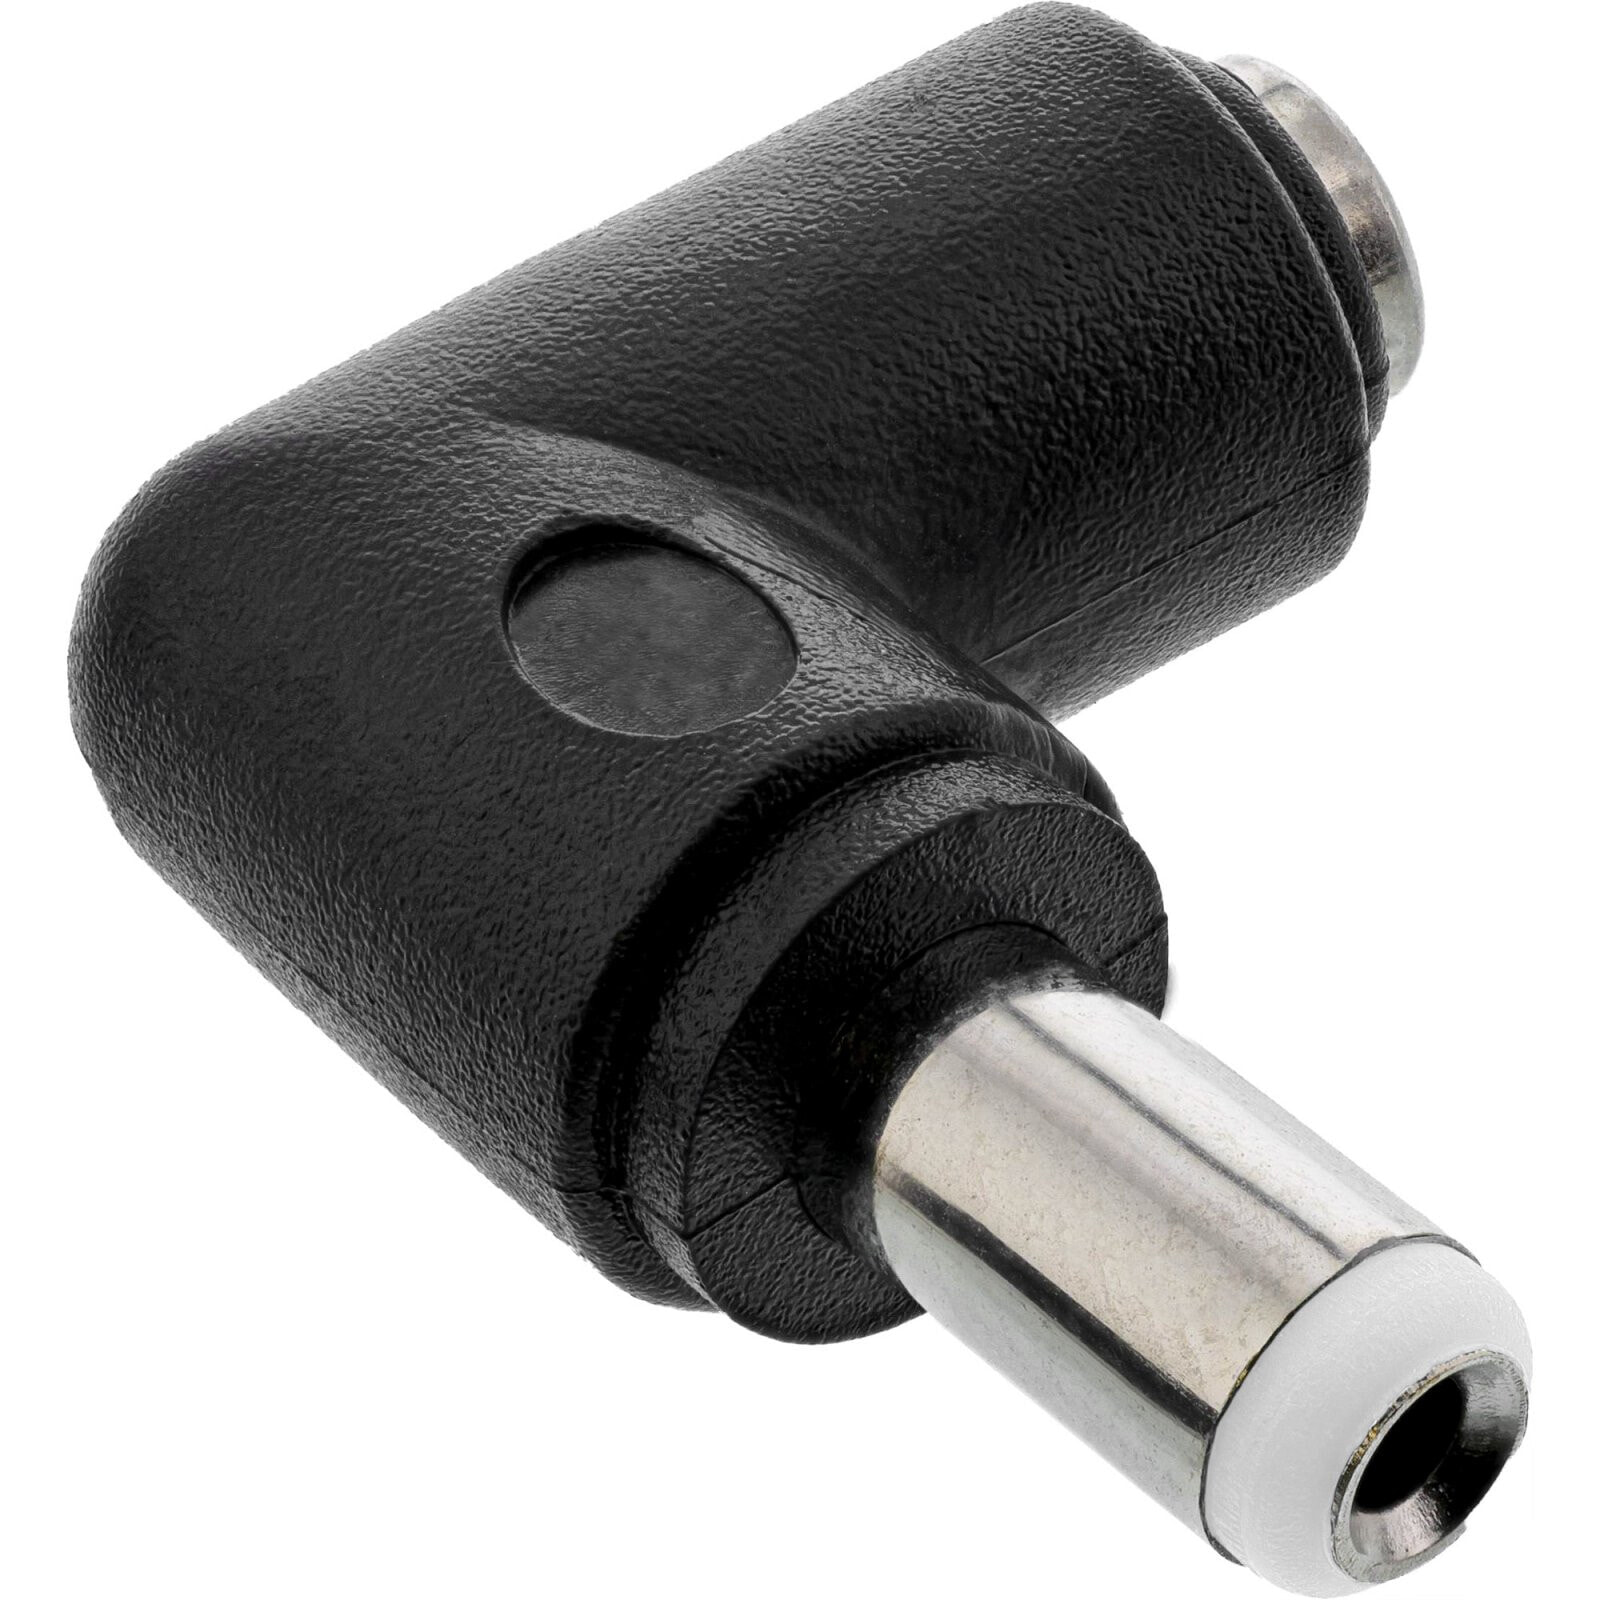 InLine DC Adapter - 5.5x2.5mm DC plug male/female angled